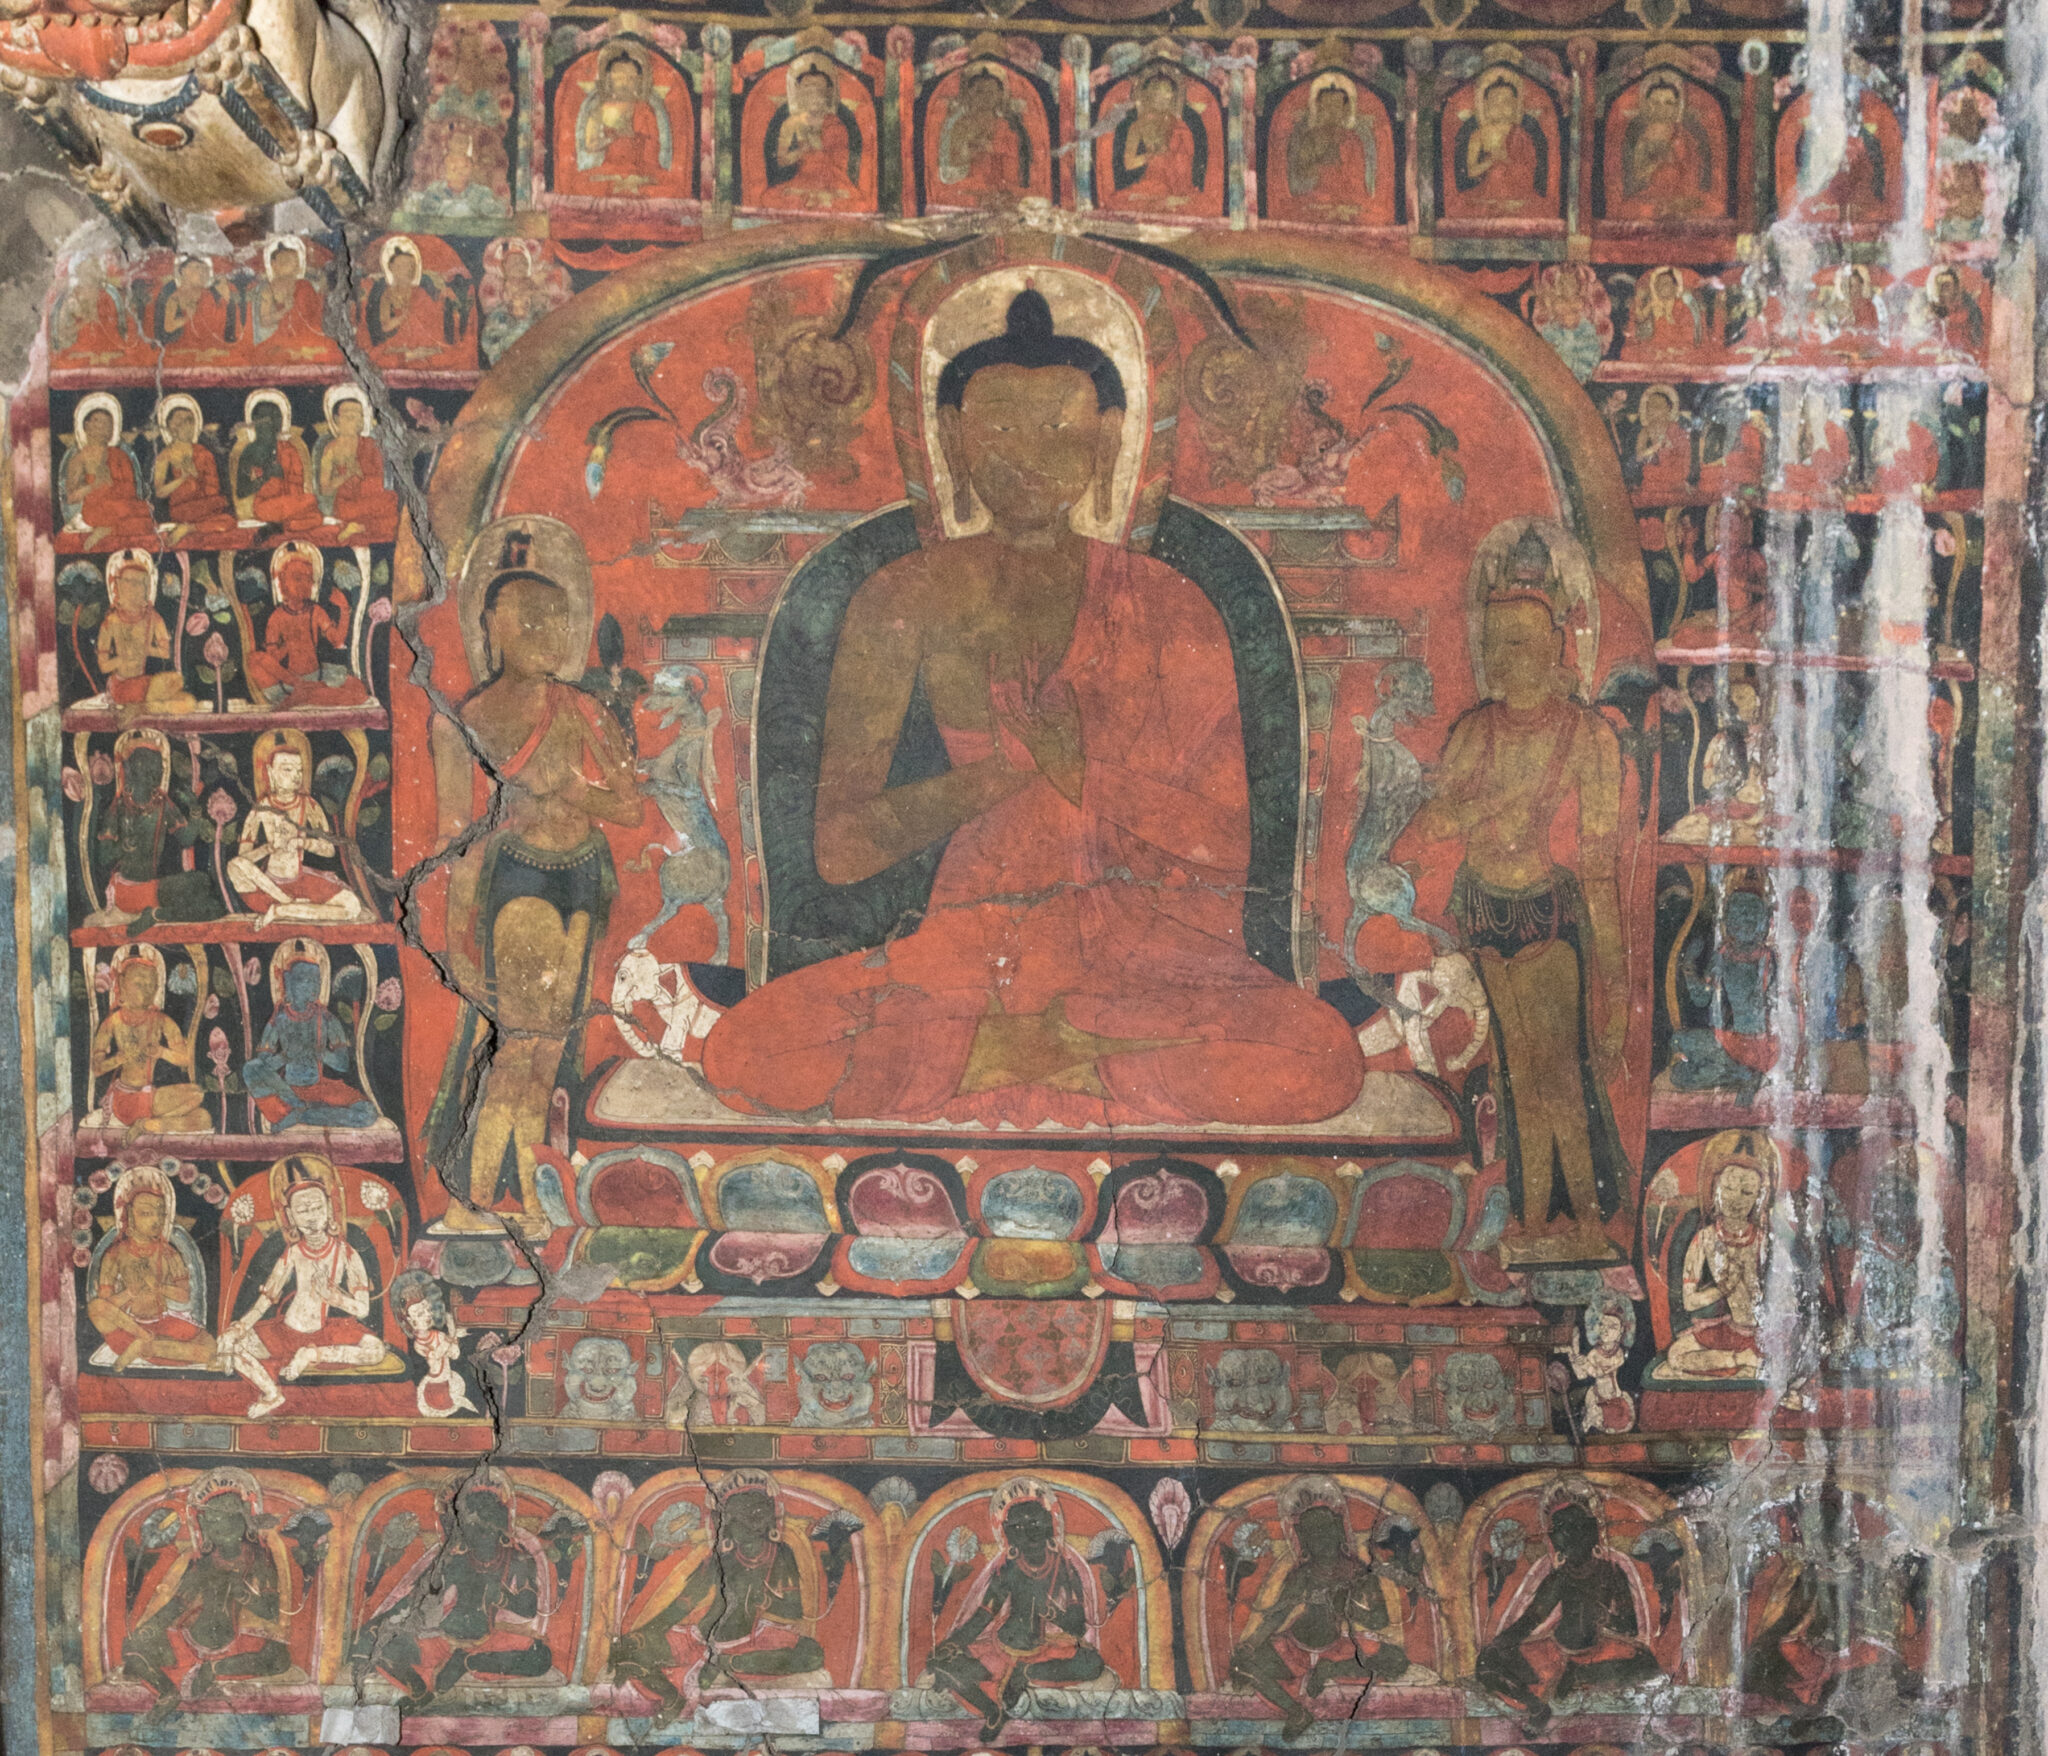 Enthroned Buddha flanked by attendants, set amidst dozens of deity portraits arranged in registers